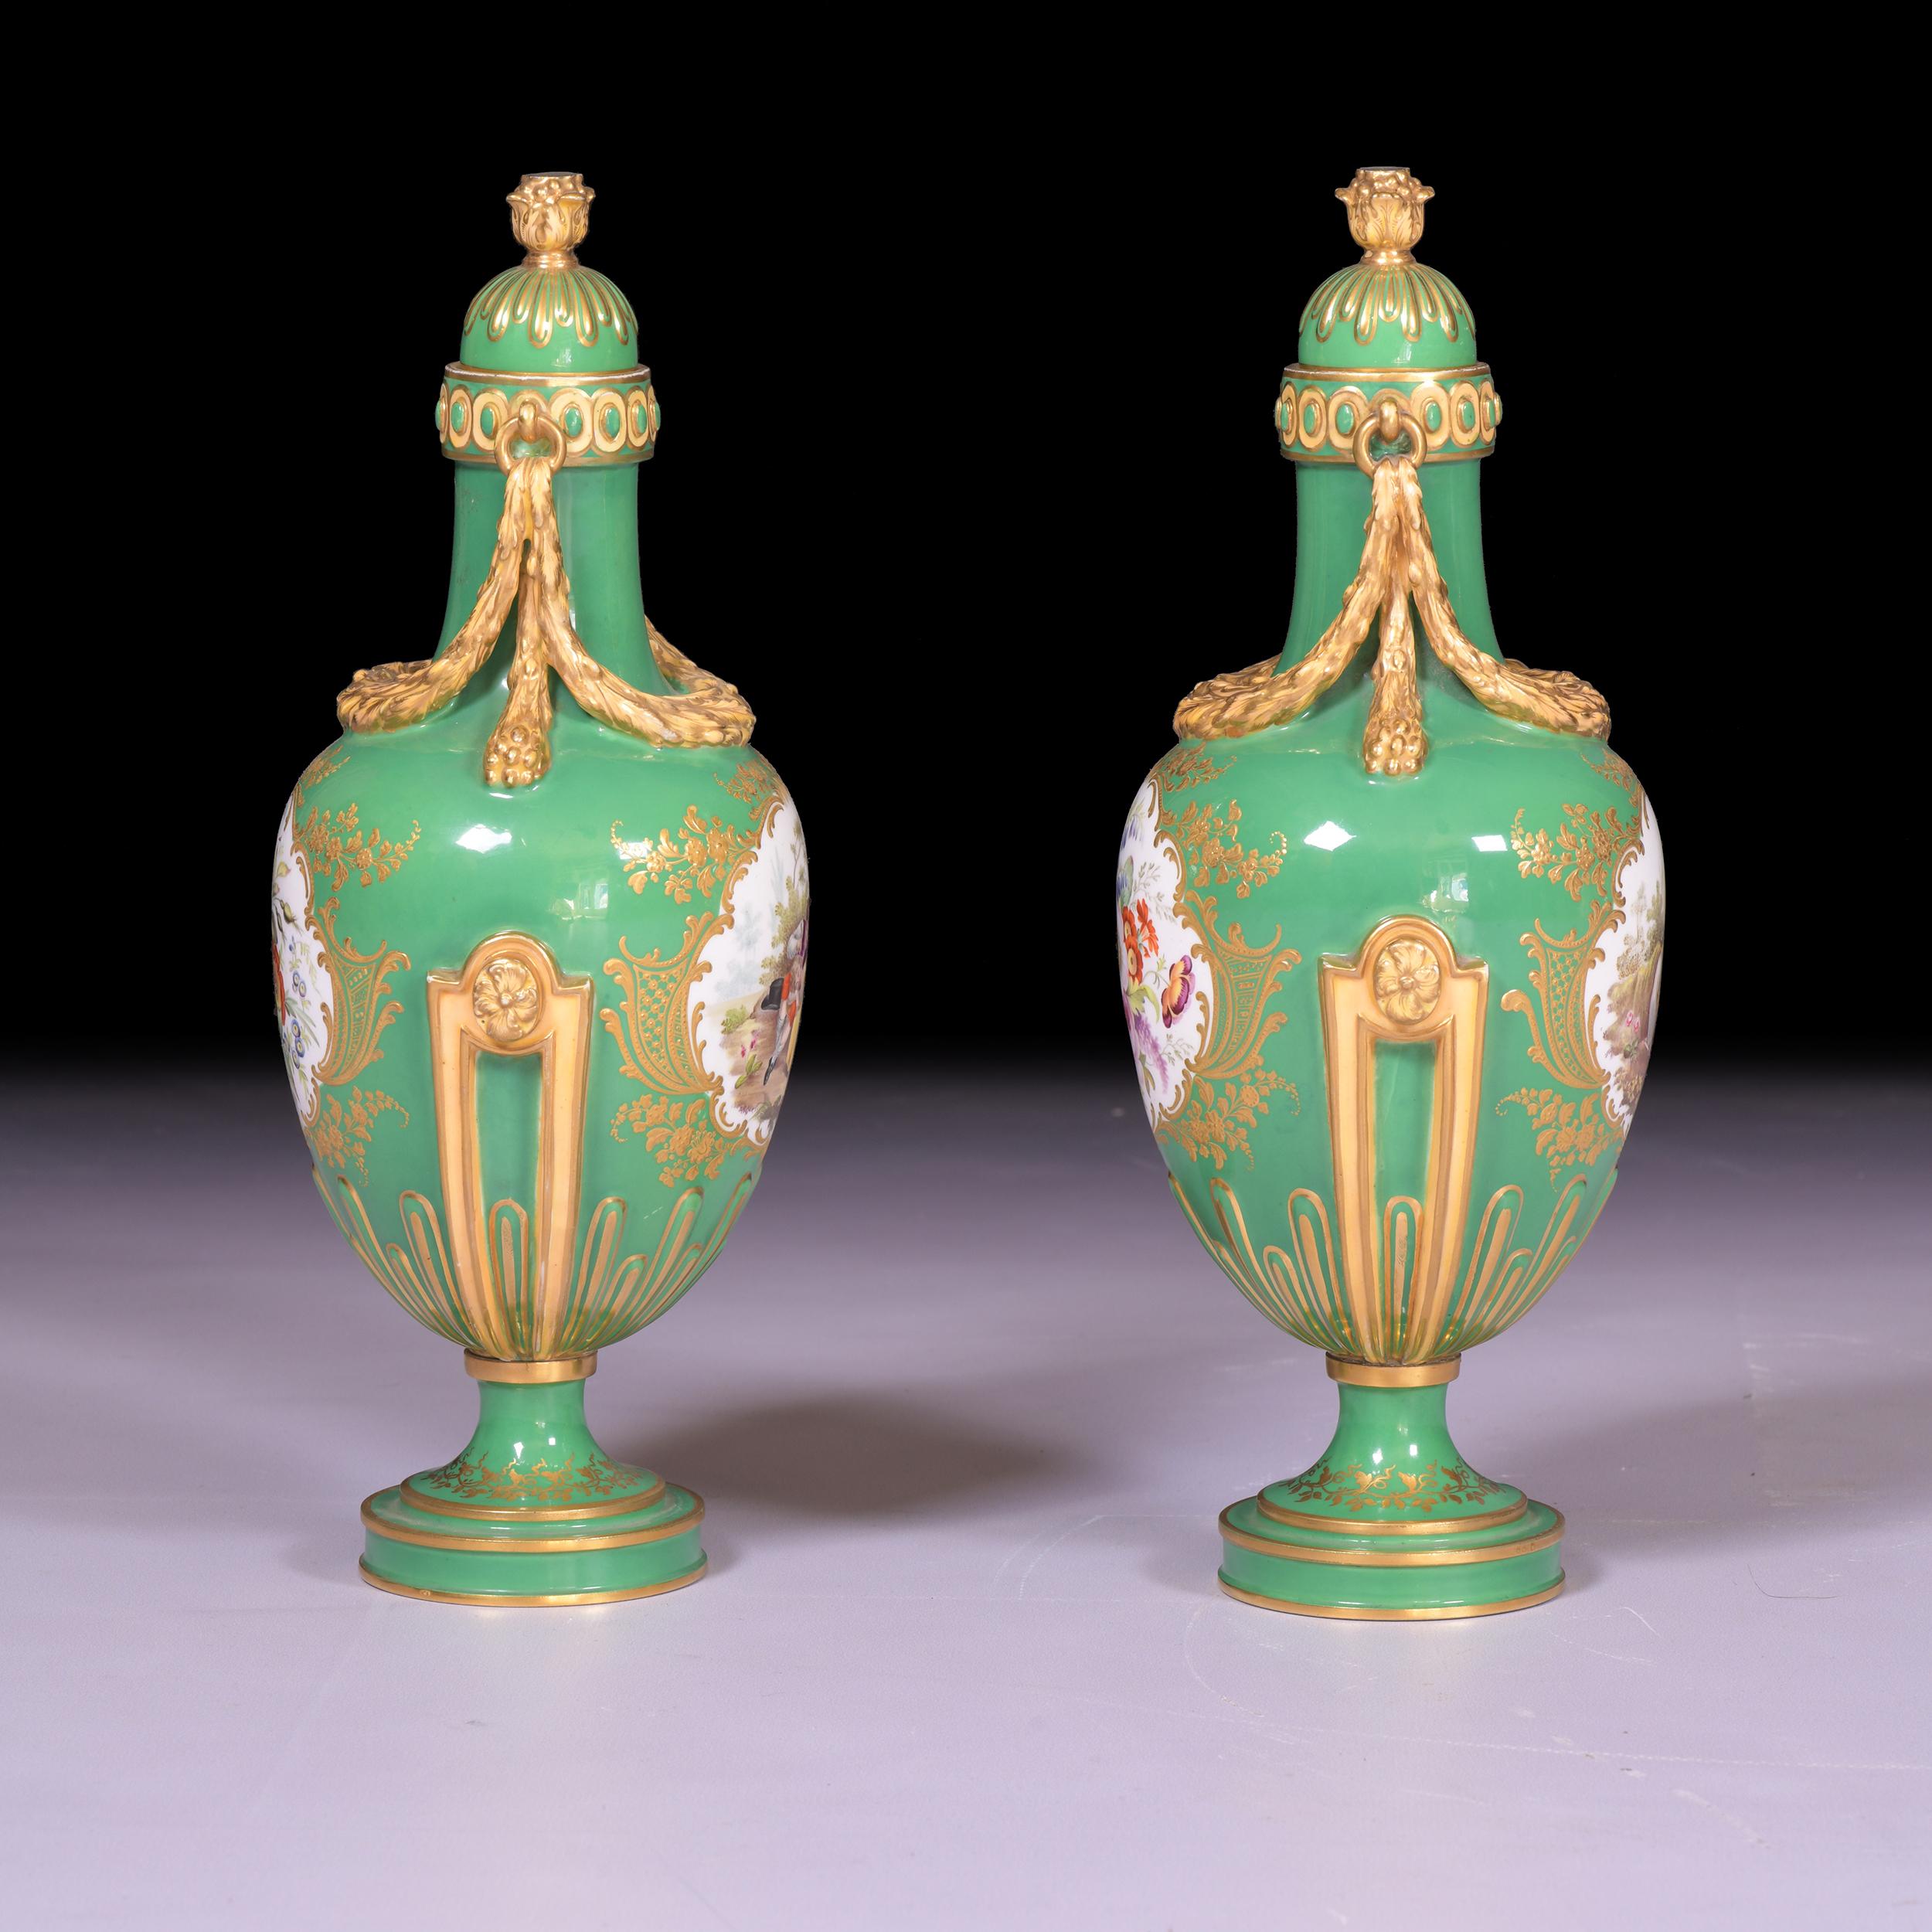 Pair Of 19th Century English Porcelain Vases & Covers By Coalport For Sale 2